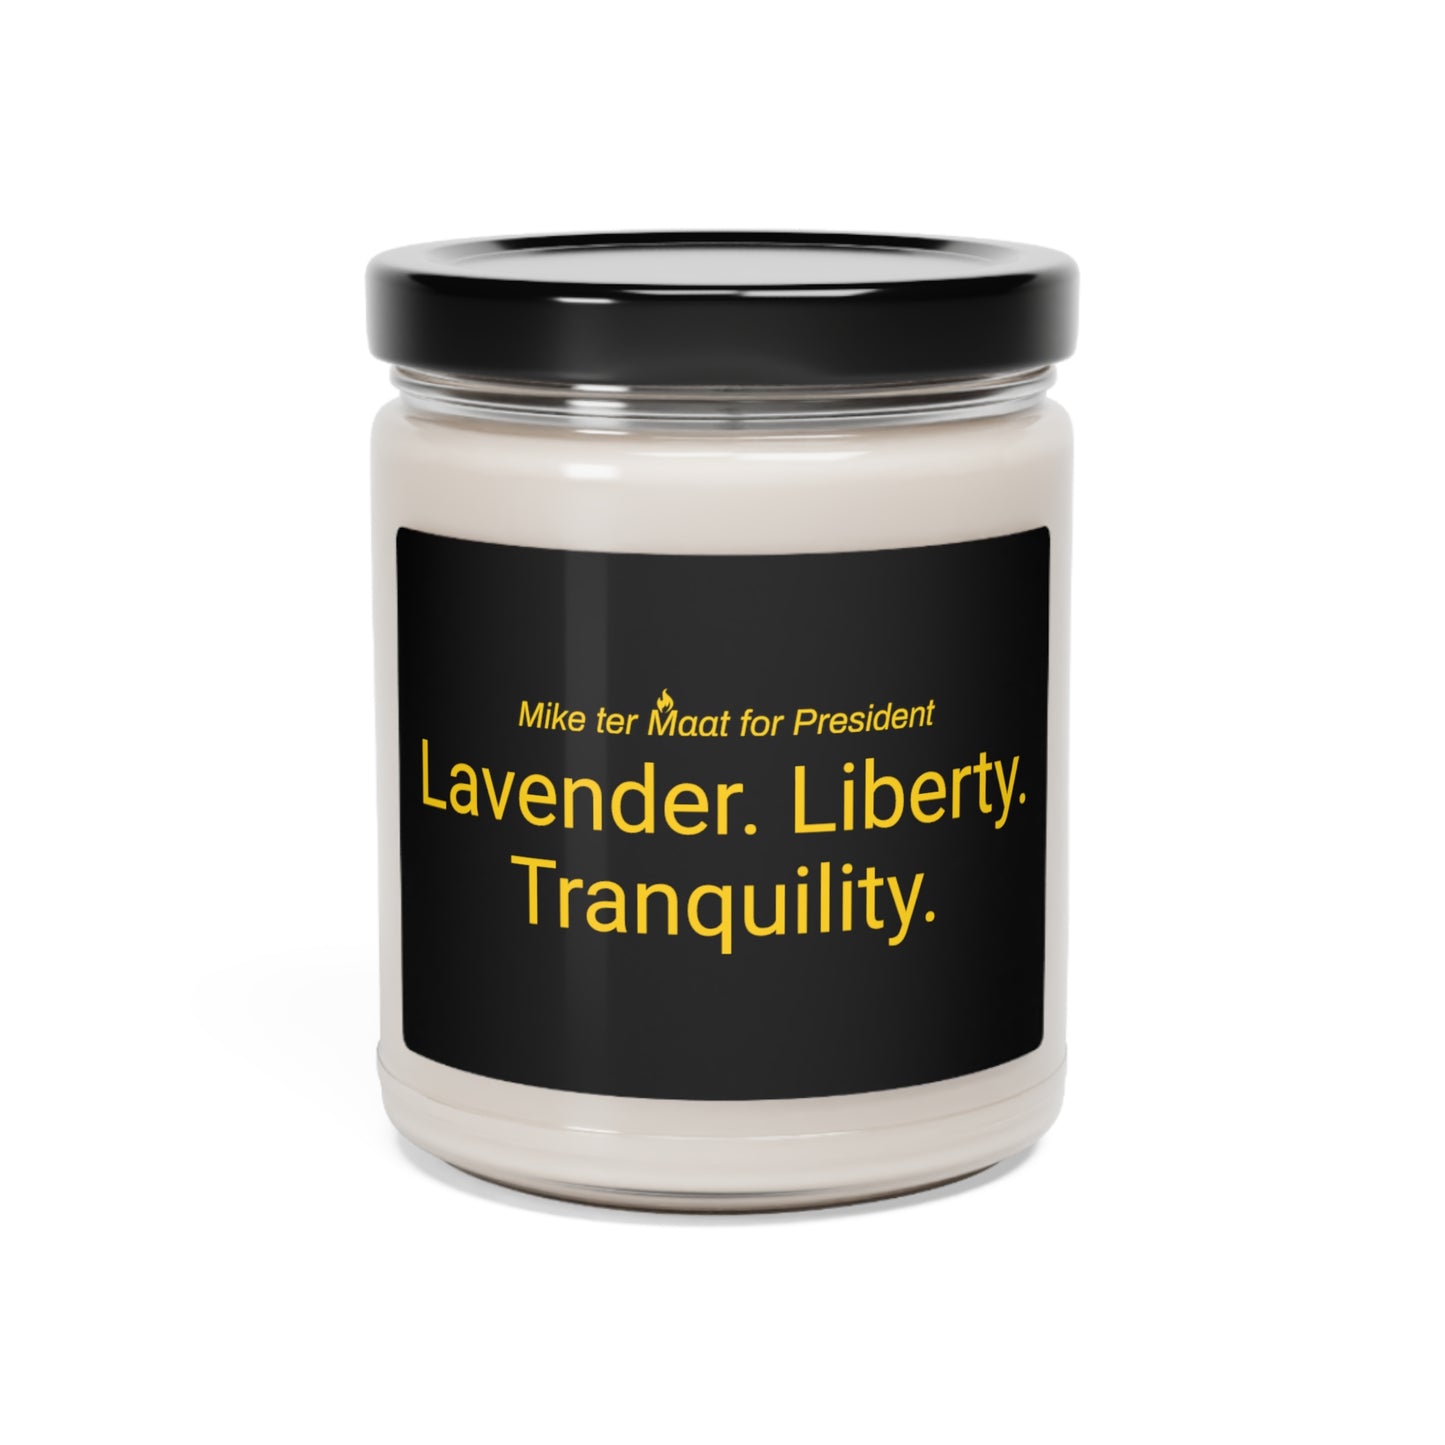 Lavender Liberty Tranquility Scented Soy Candle, 9oz